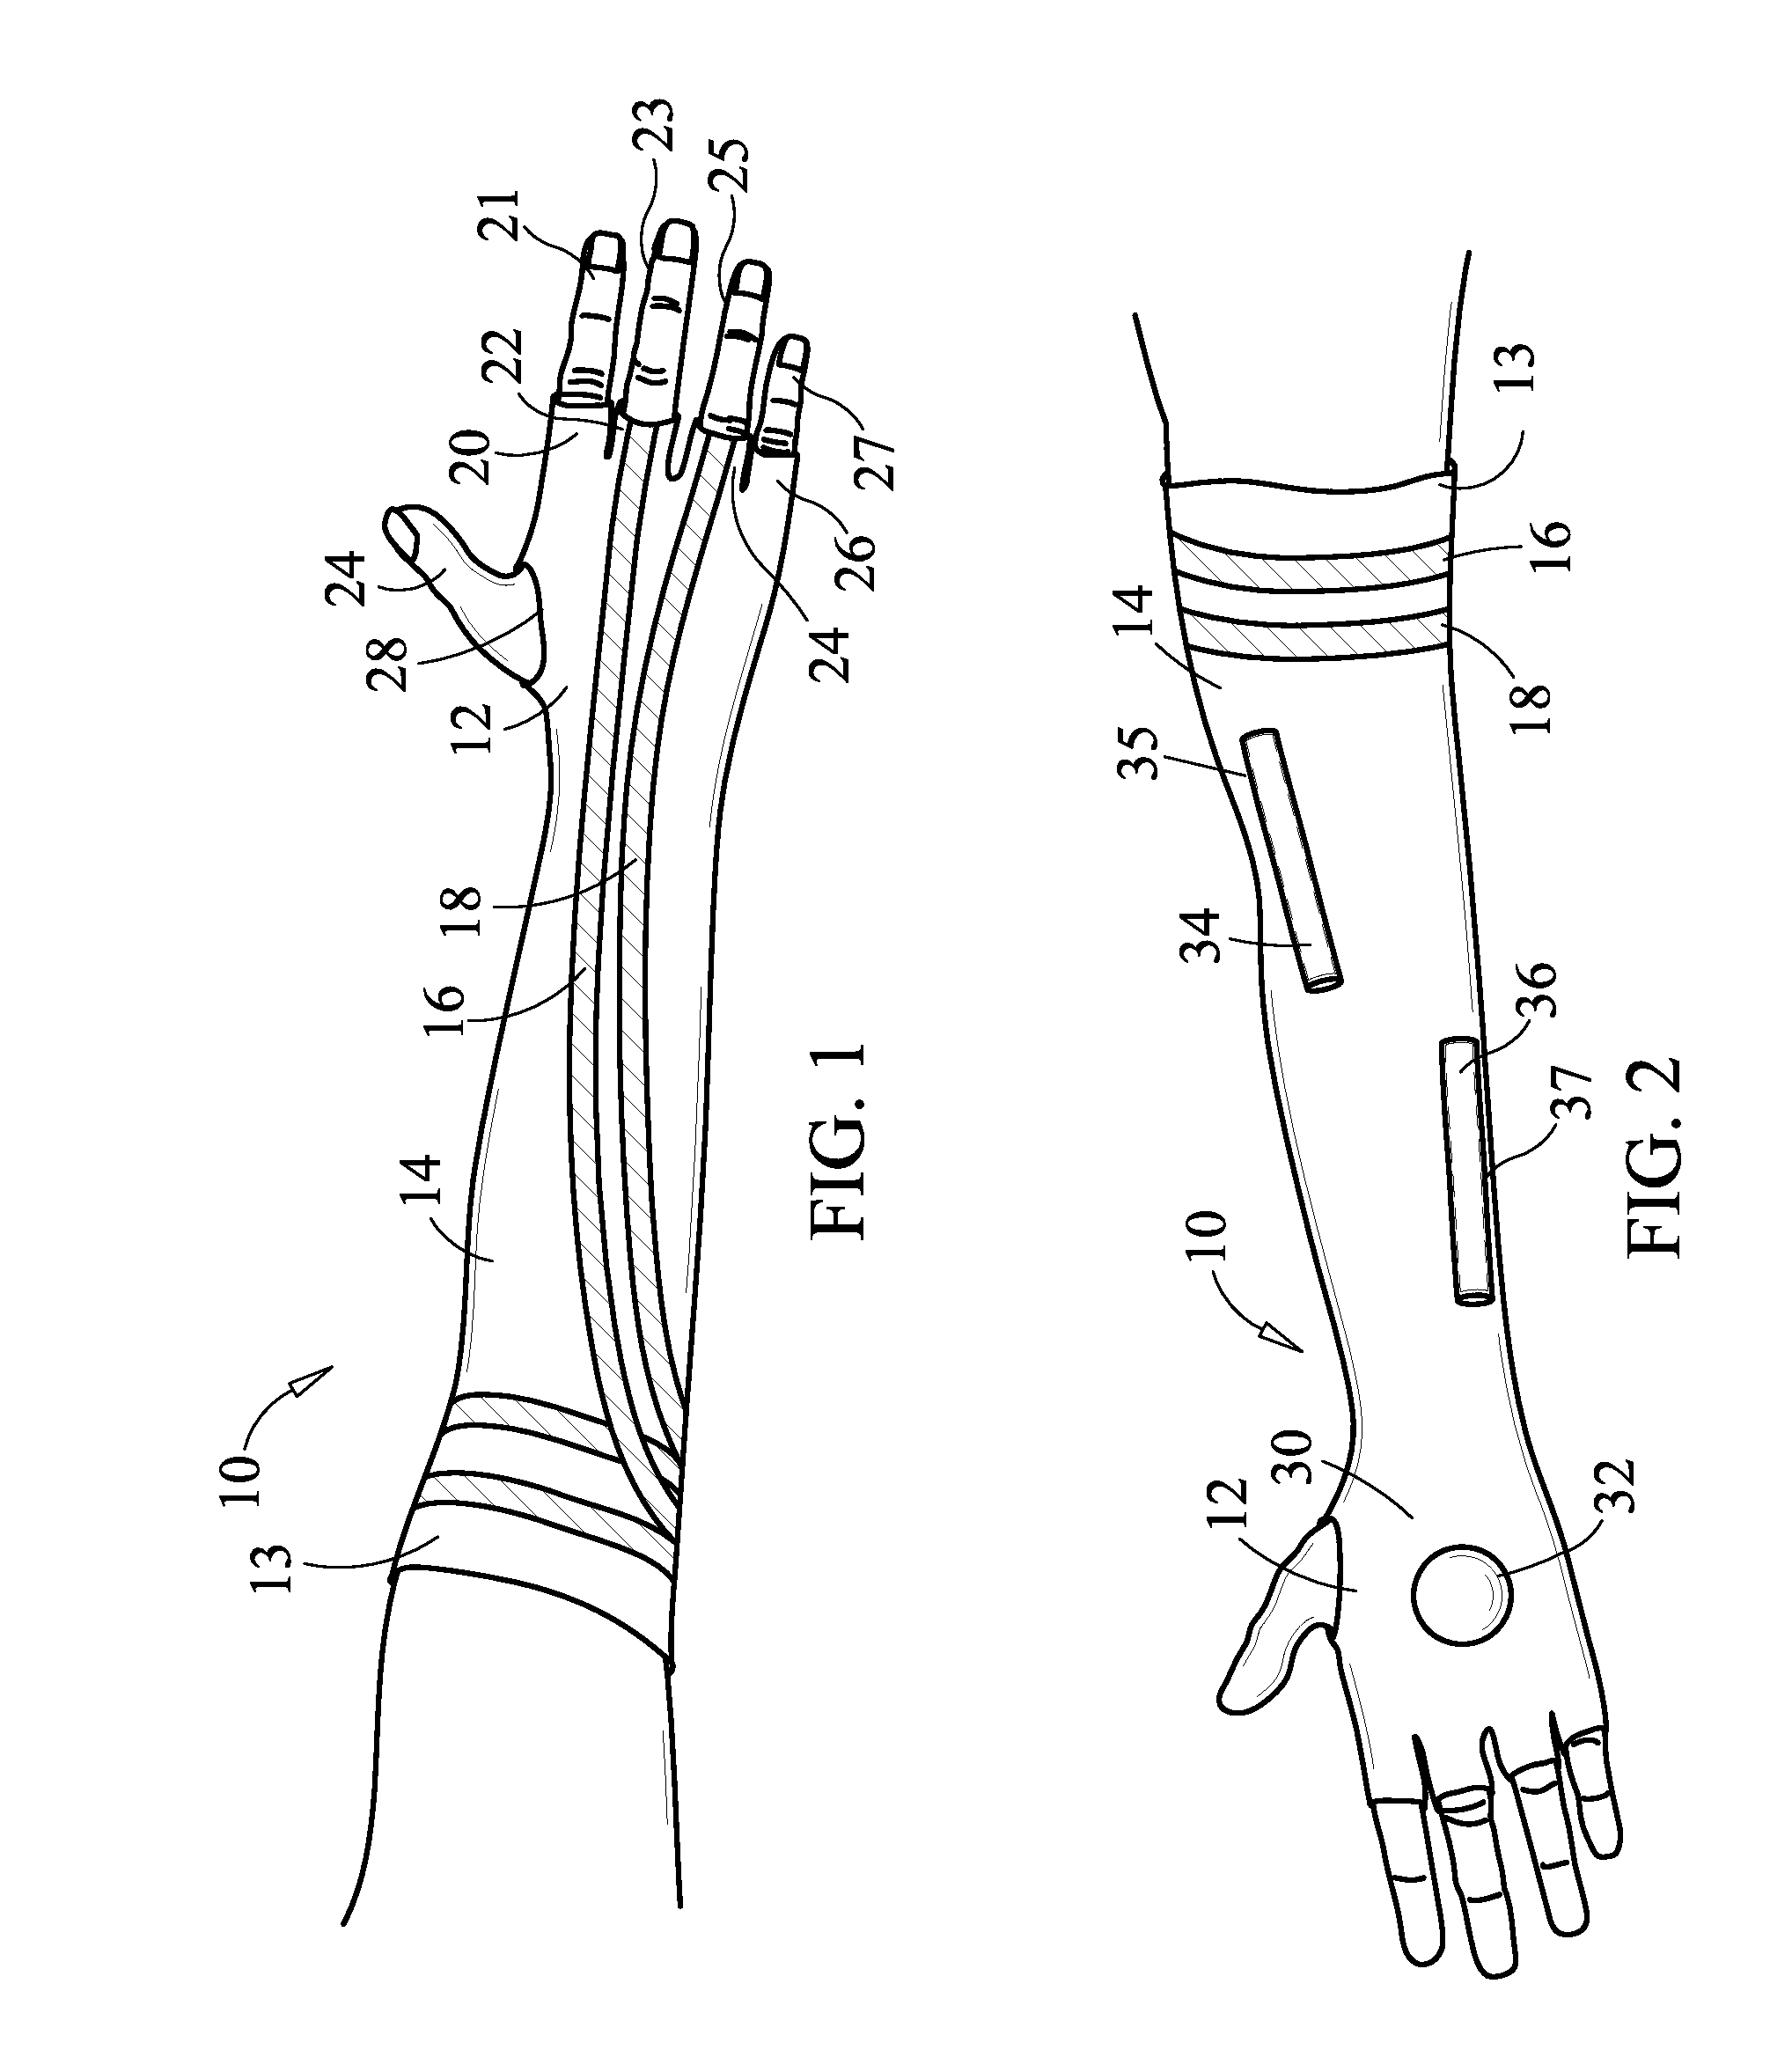 Apparatus for training an athlete and methods of using the same